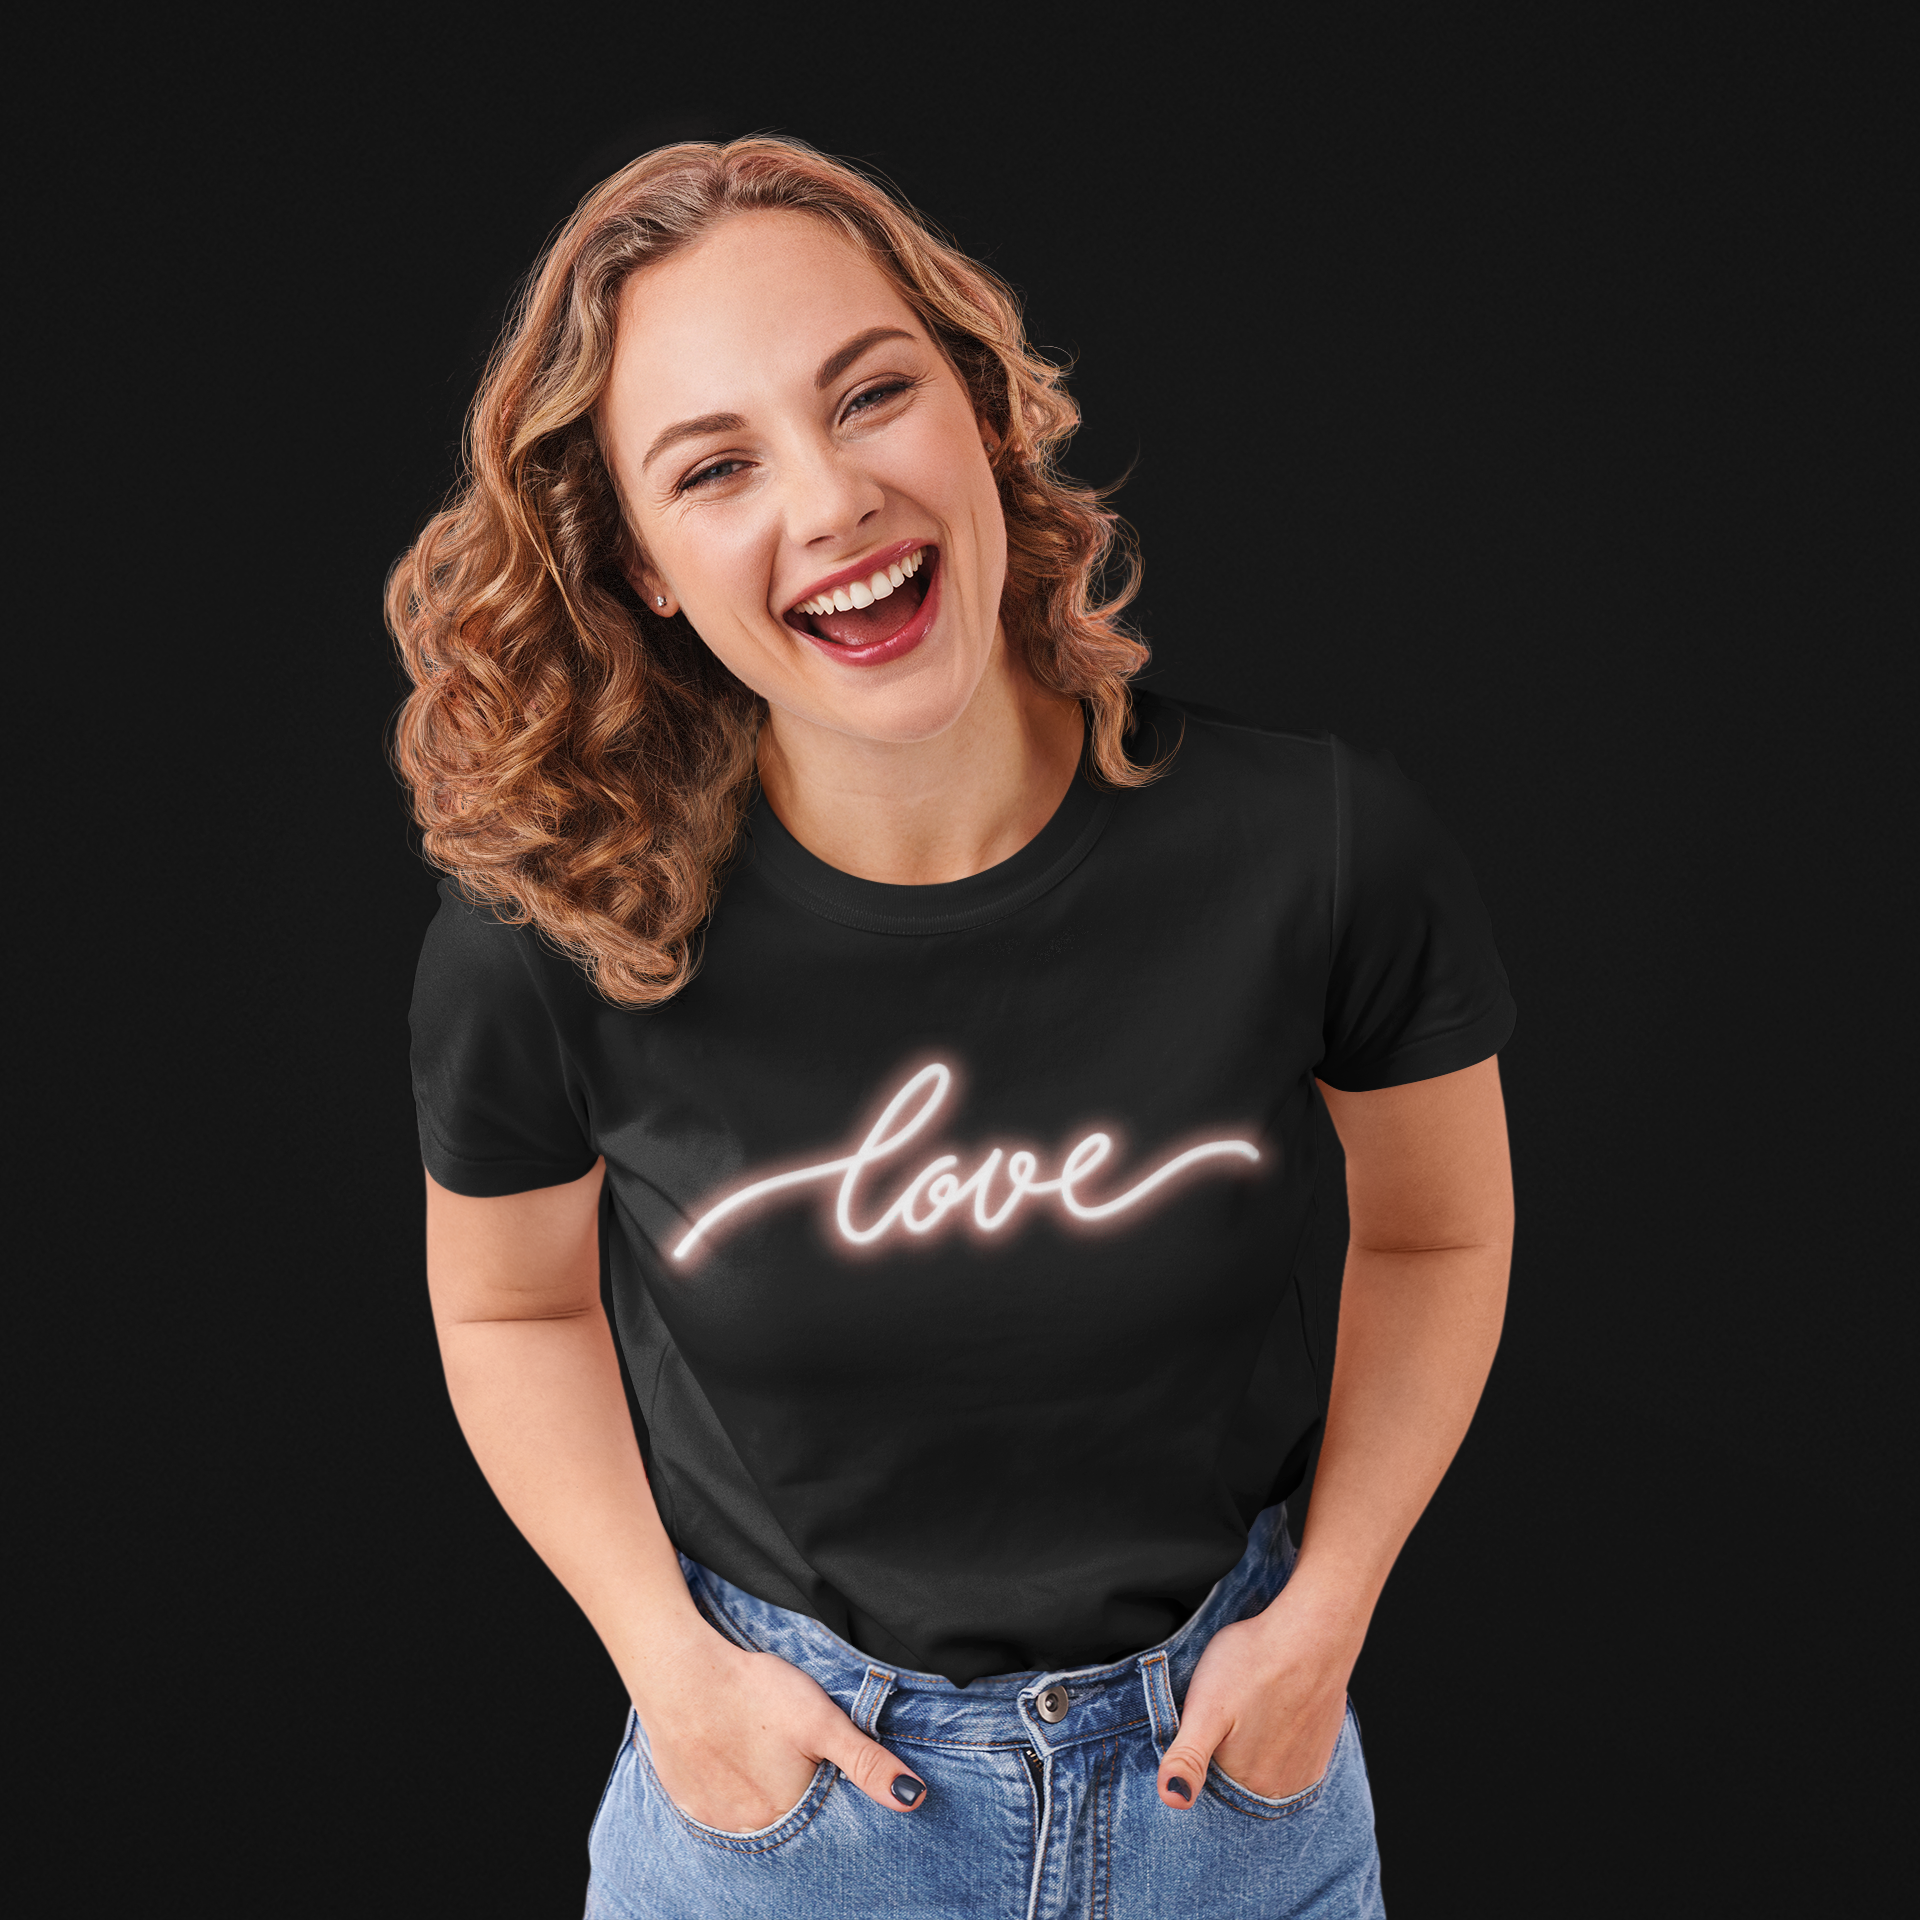 love-t-shirt-love-shirt-love-tee-newlywed-gift-gift-for-girlfriend-gift-for-wife-gift-for-him-gift-for-her-engagement-tee-unisex-cotton-tee